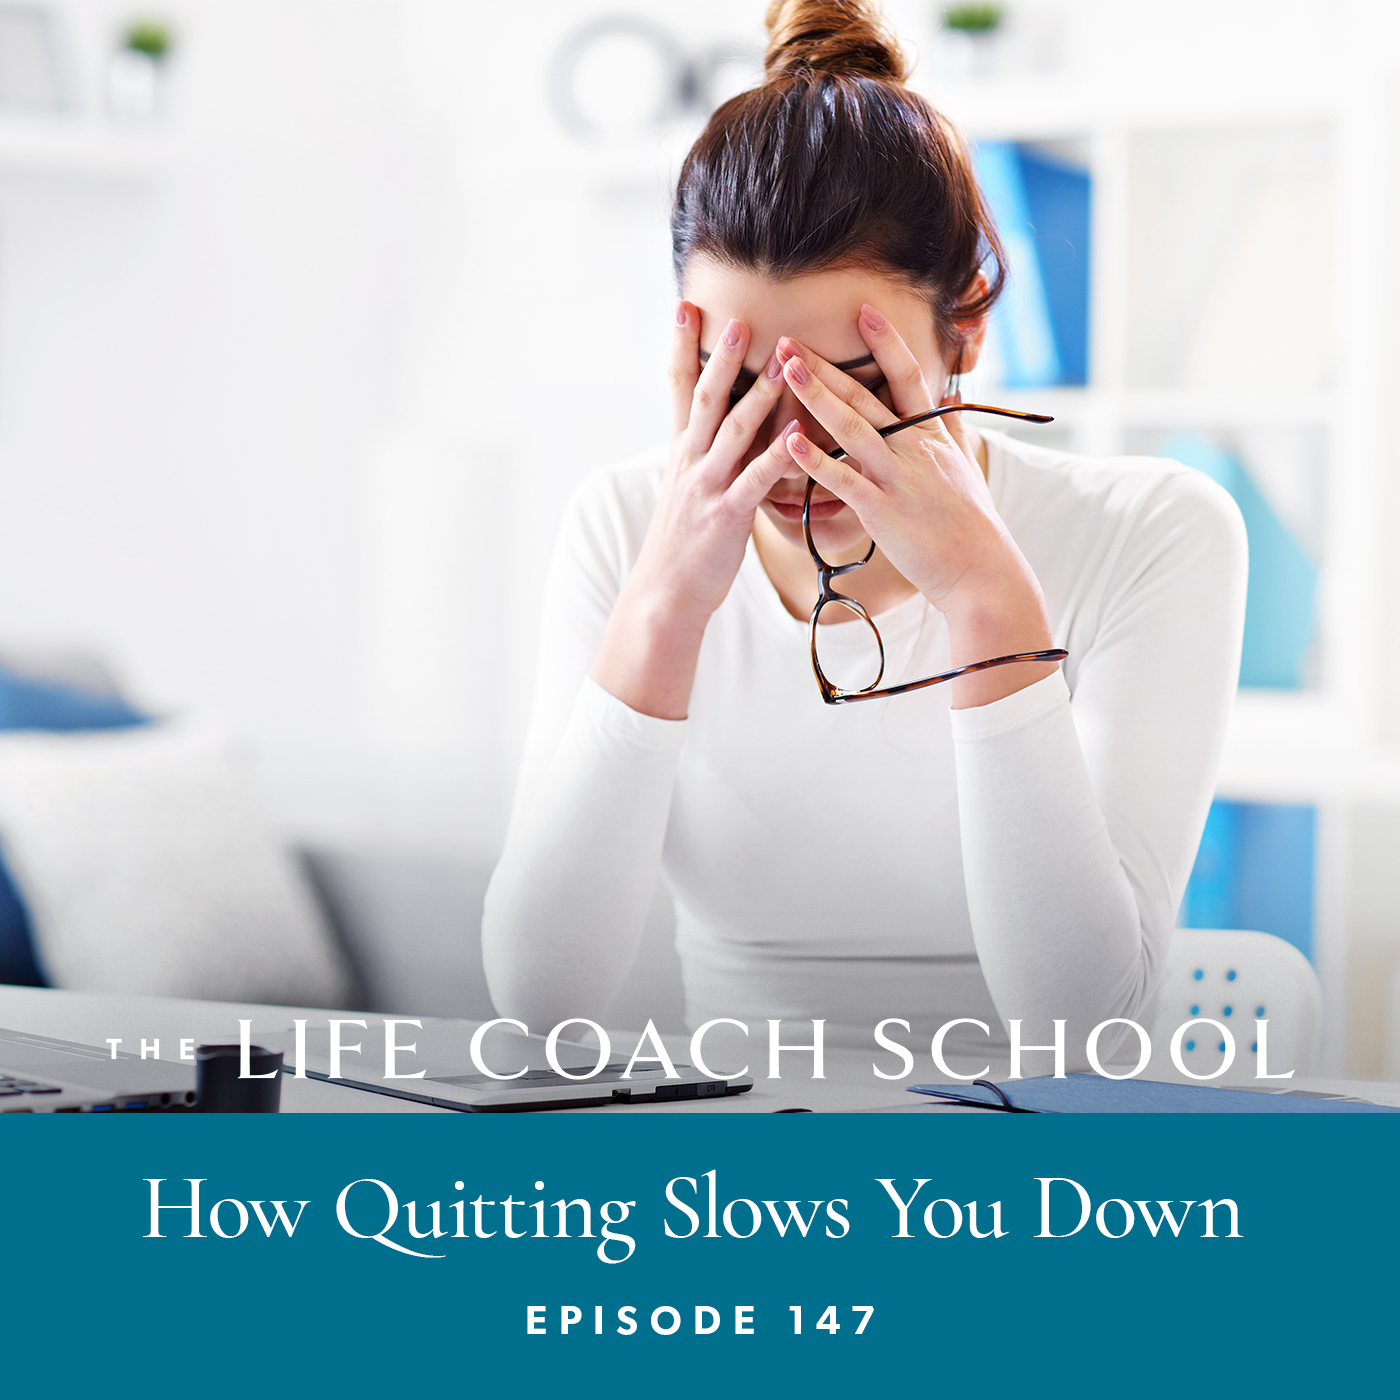 The Life Coach School Podcast with Brooke Castillo | Episode 147 | How Quitting Slows You Down